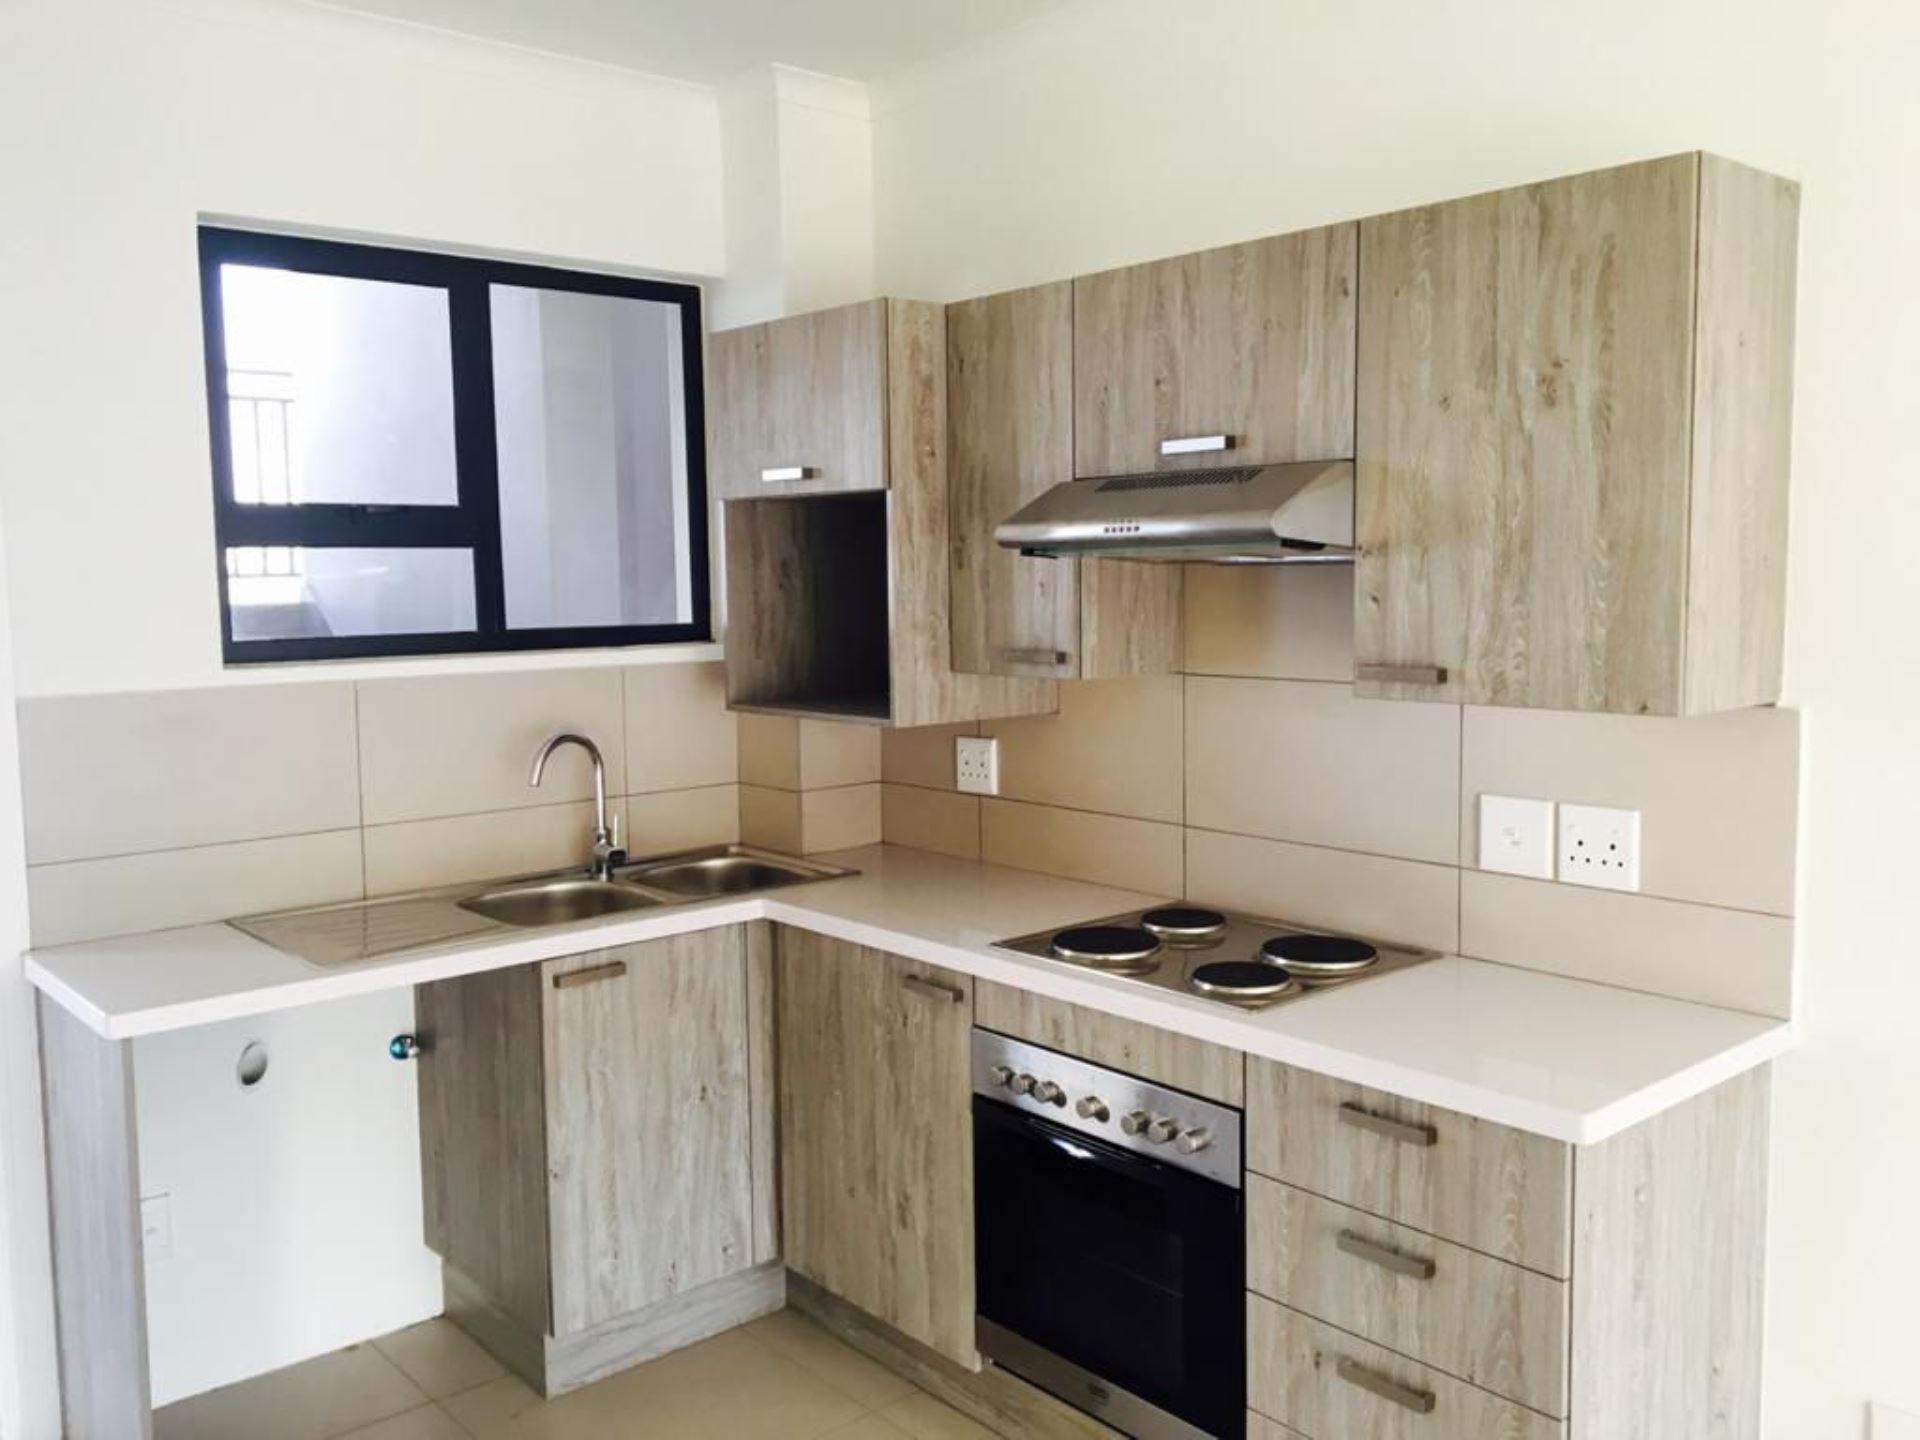 Kitchen - 10 square meters of property in Erand Gardens